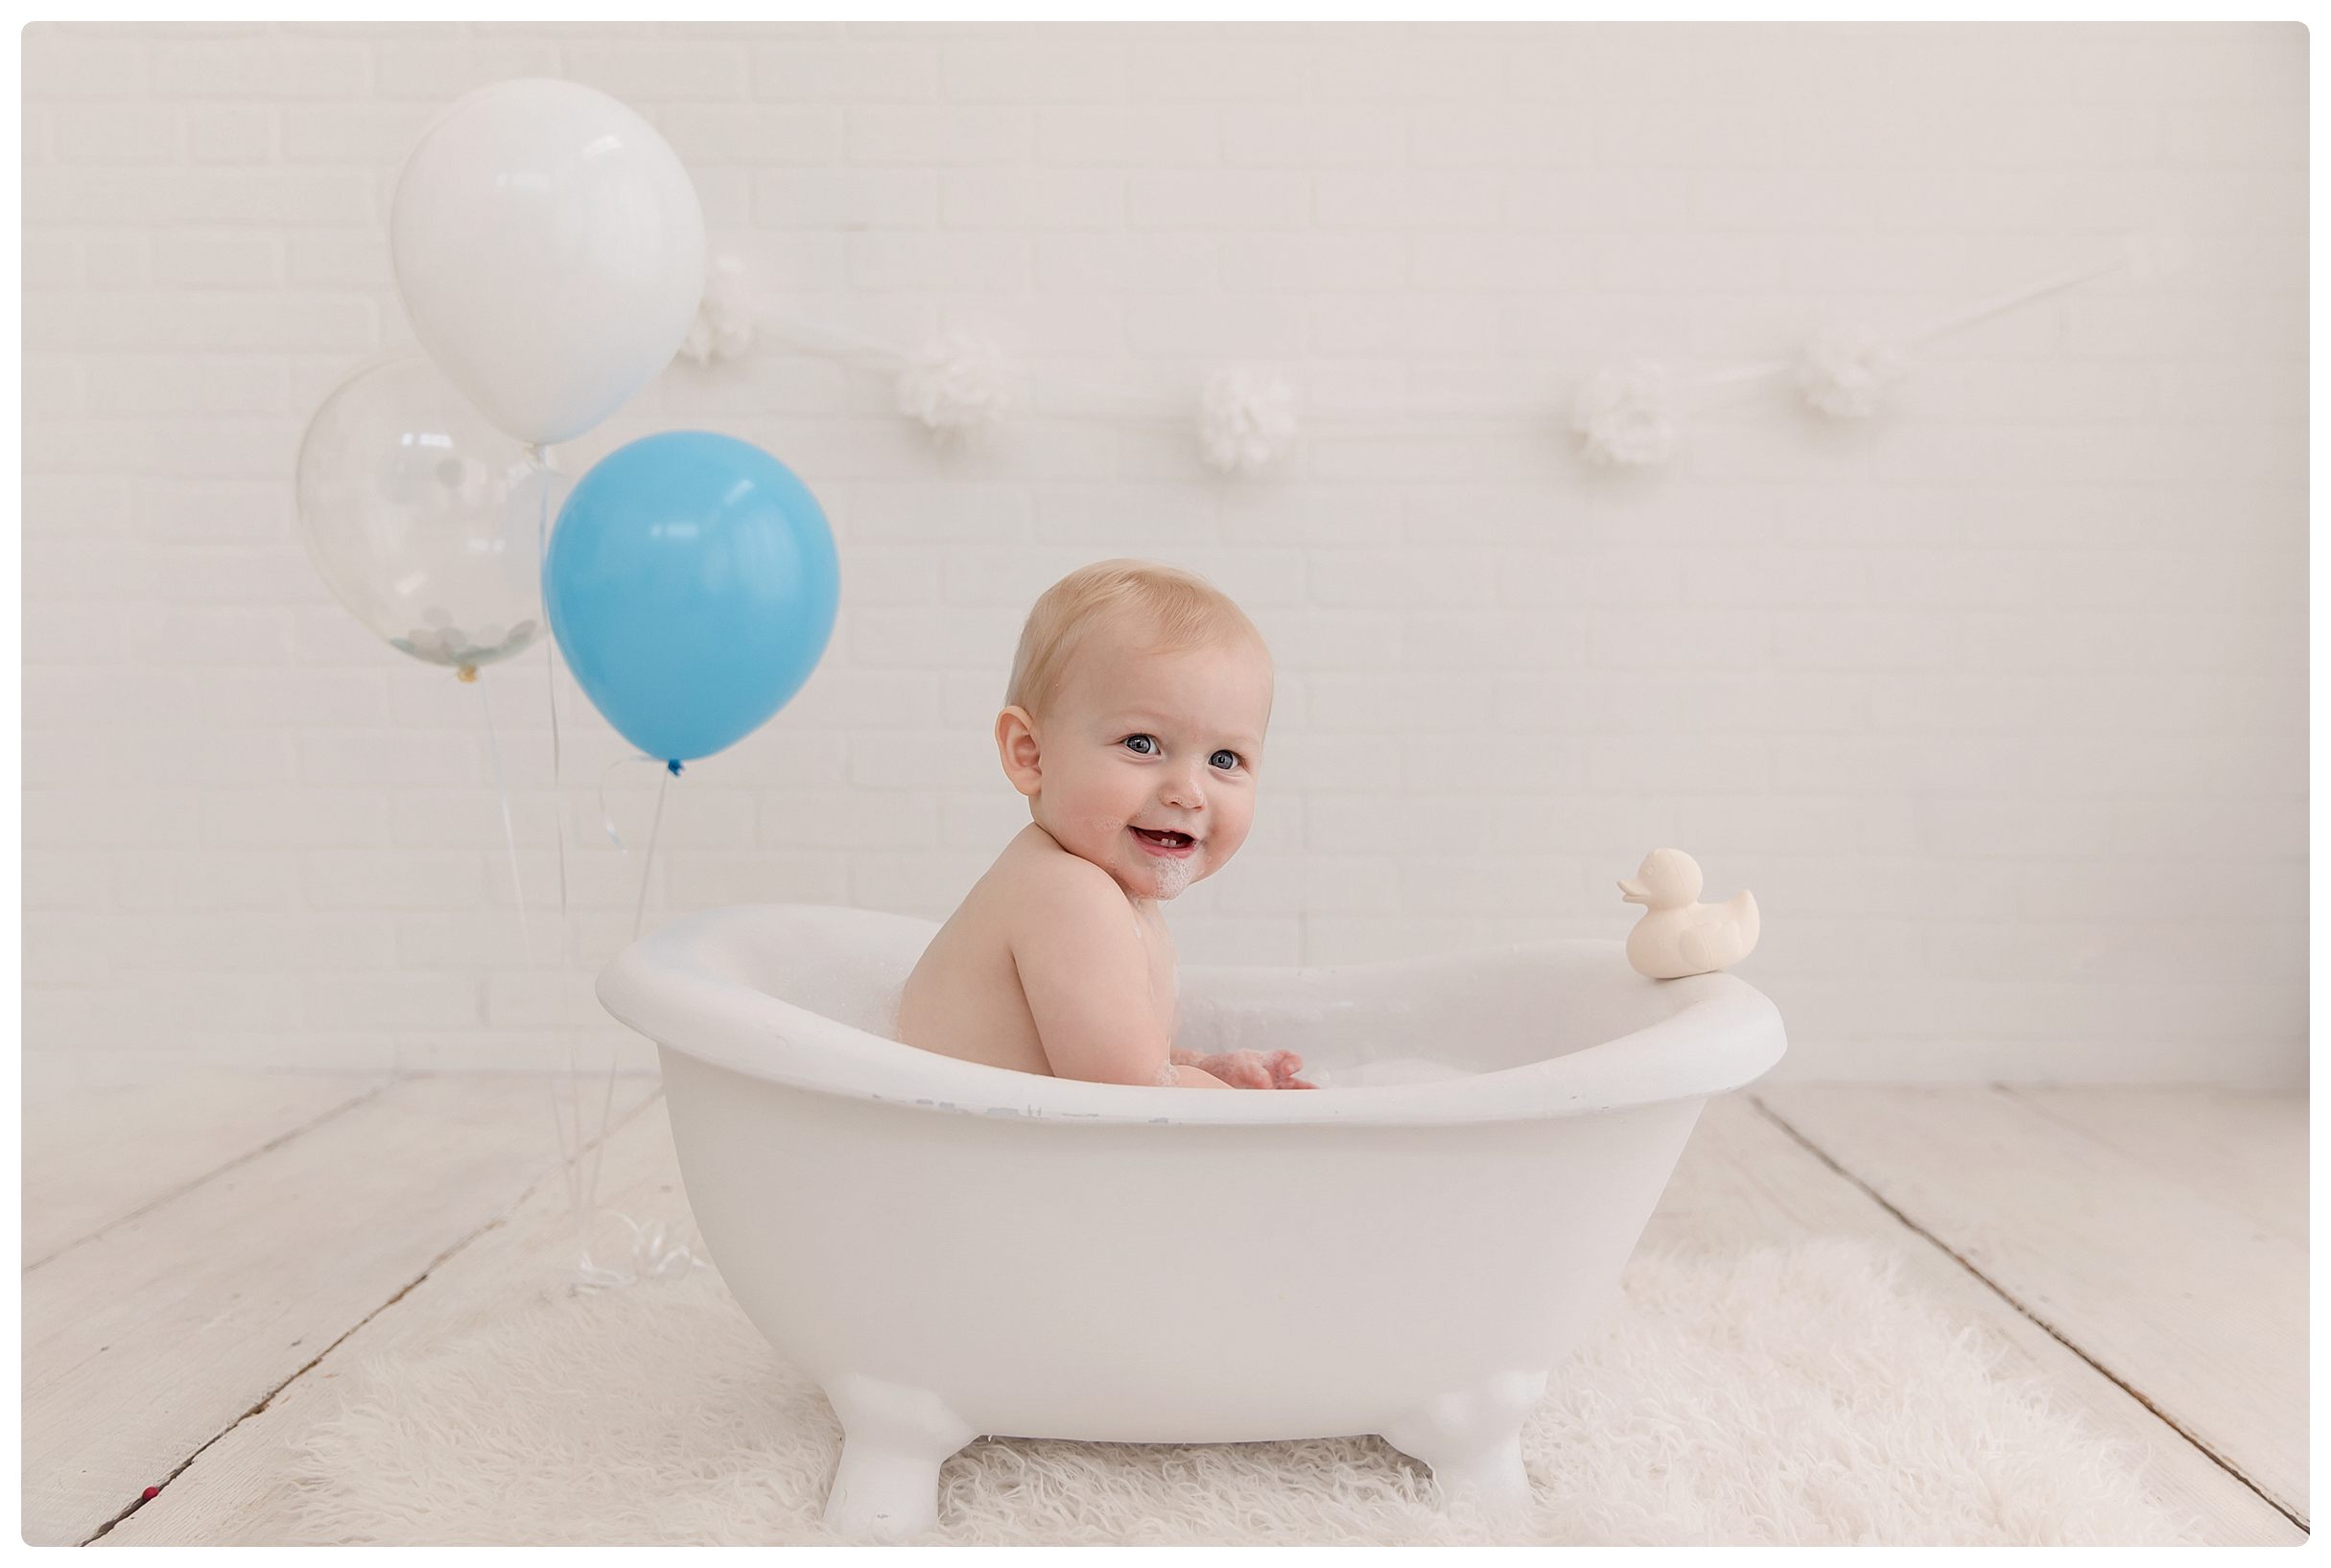 Baby theo s in the Bath one